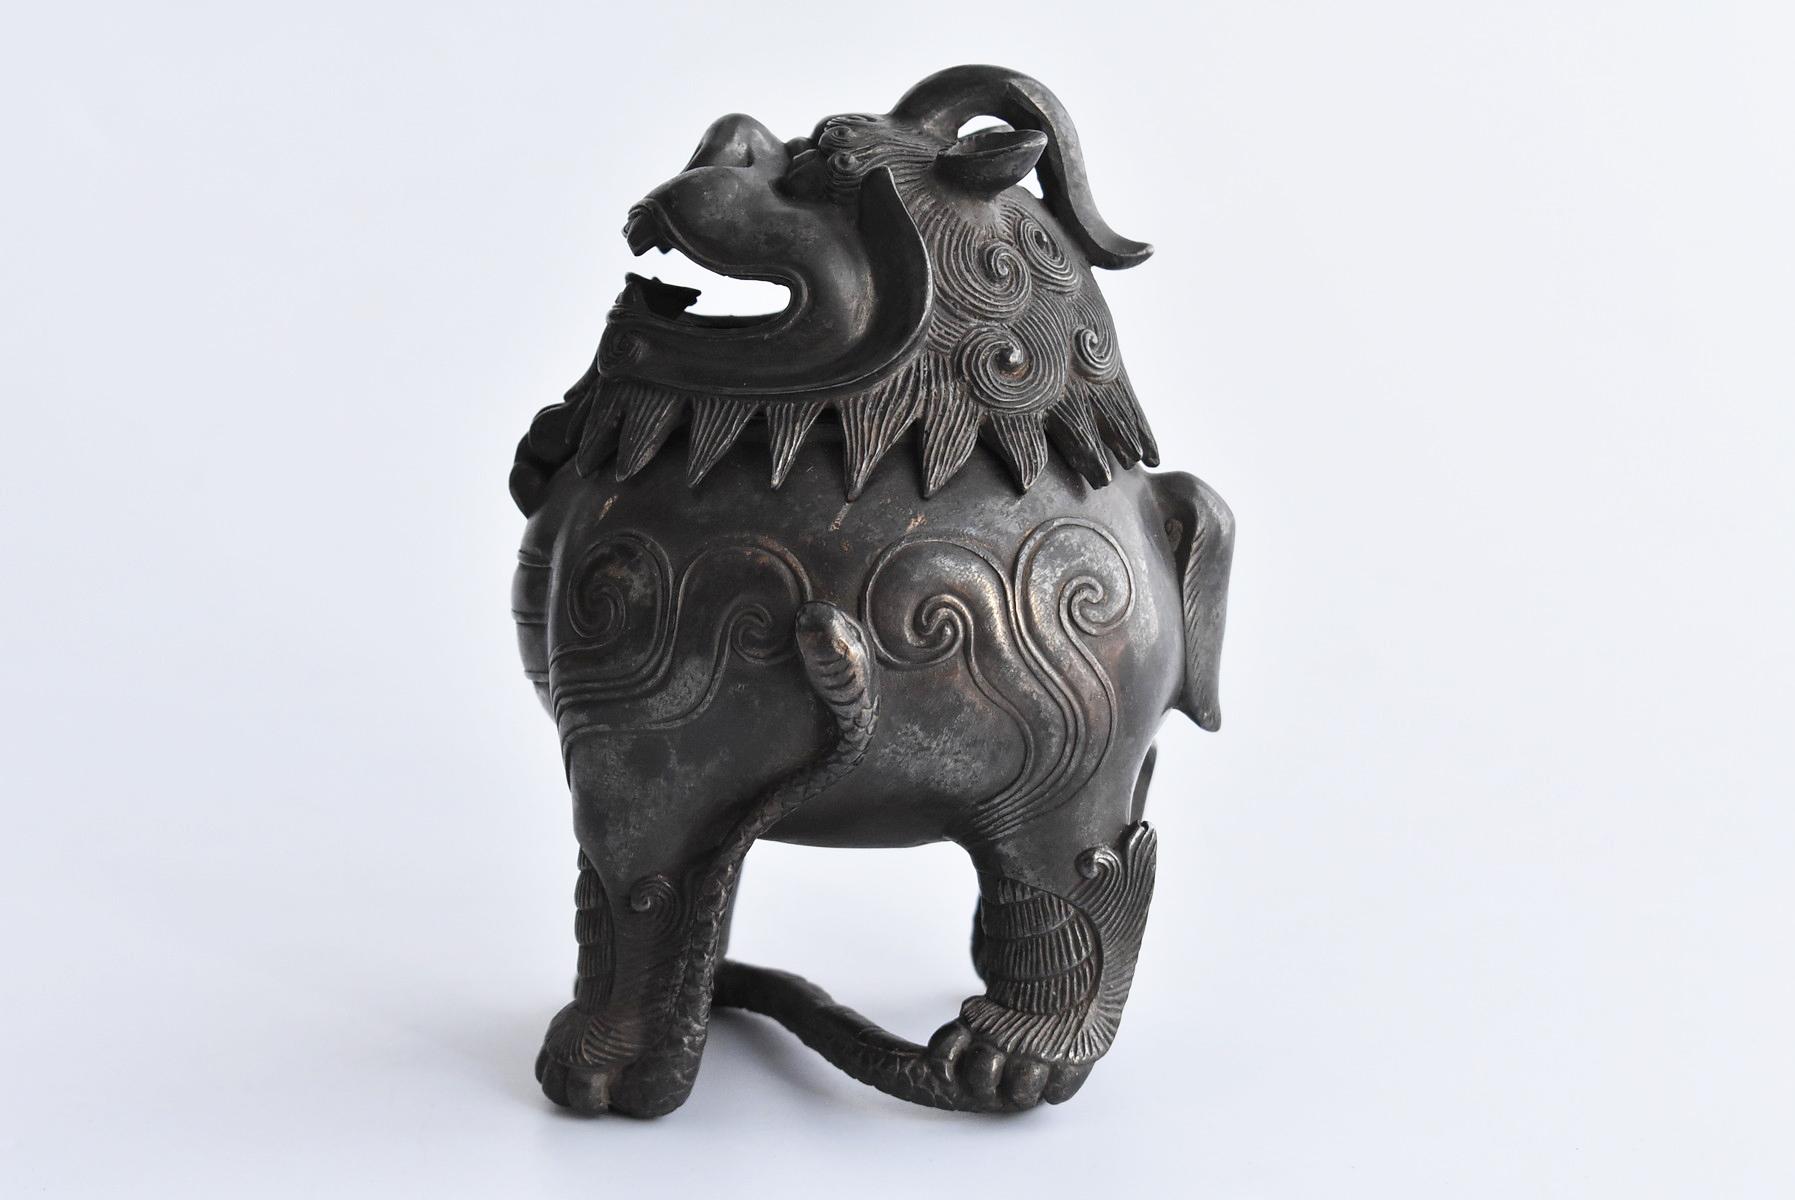 Bronzed Old Japanese Copperware or Incense Burner in the Shape of a Lion/Carved Figurine